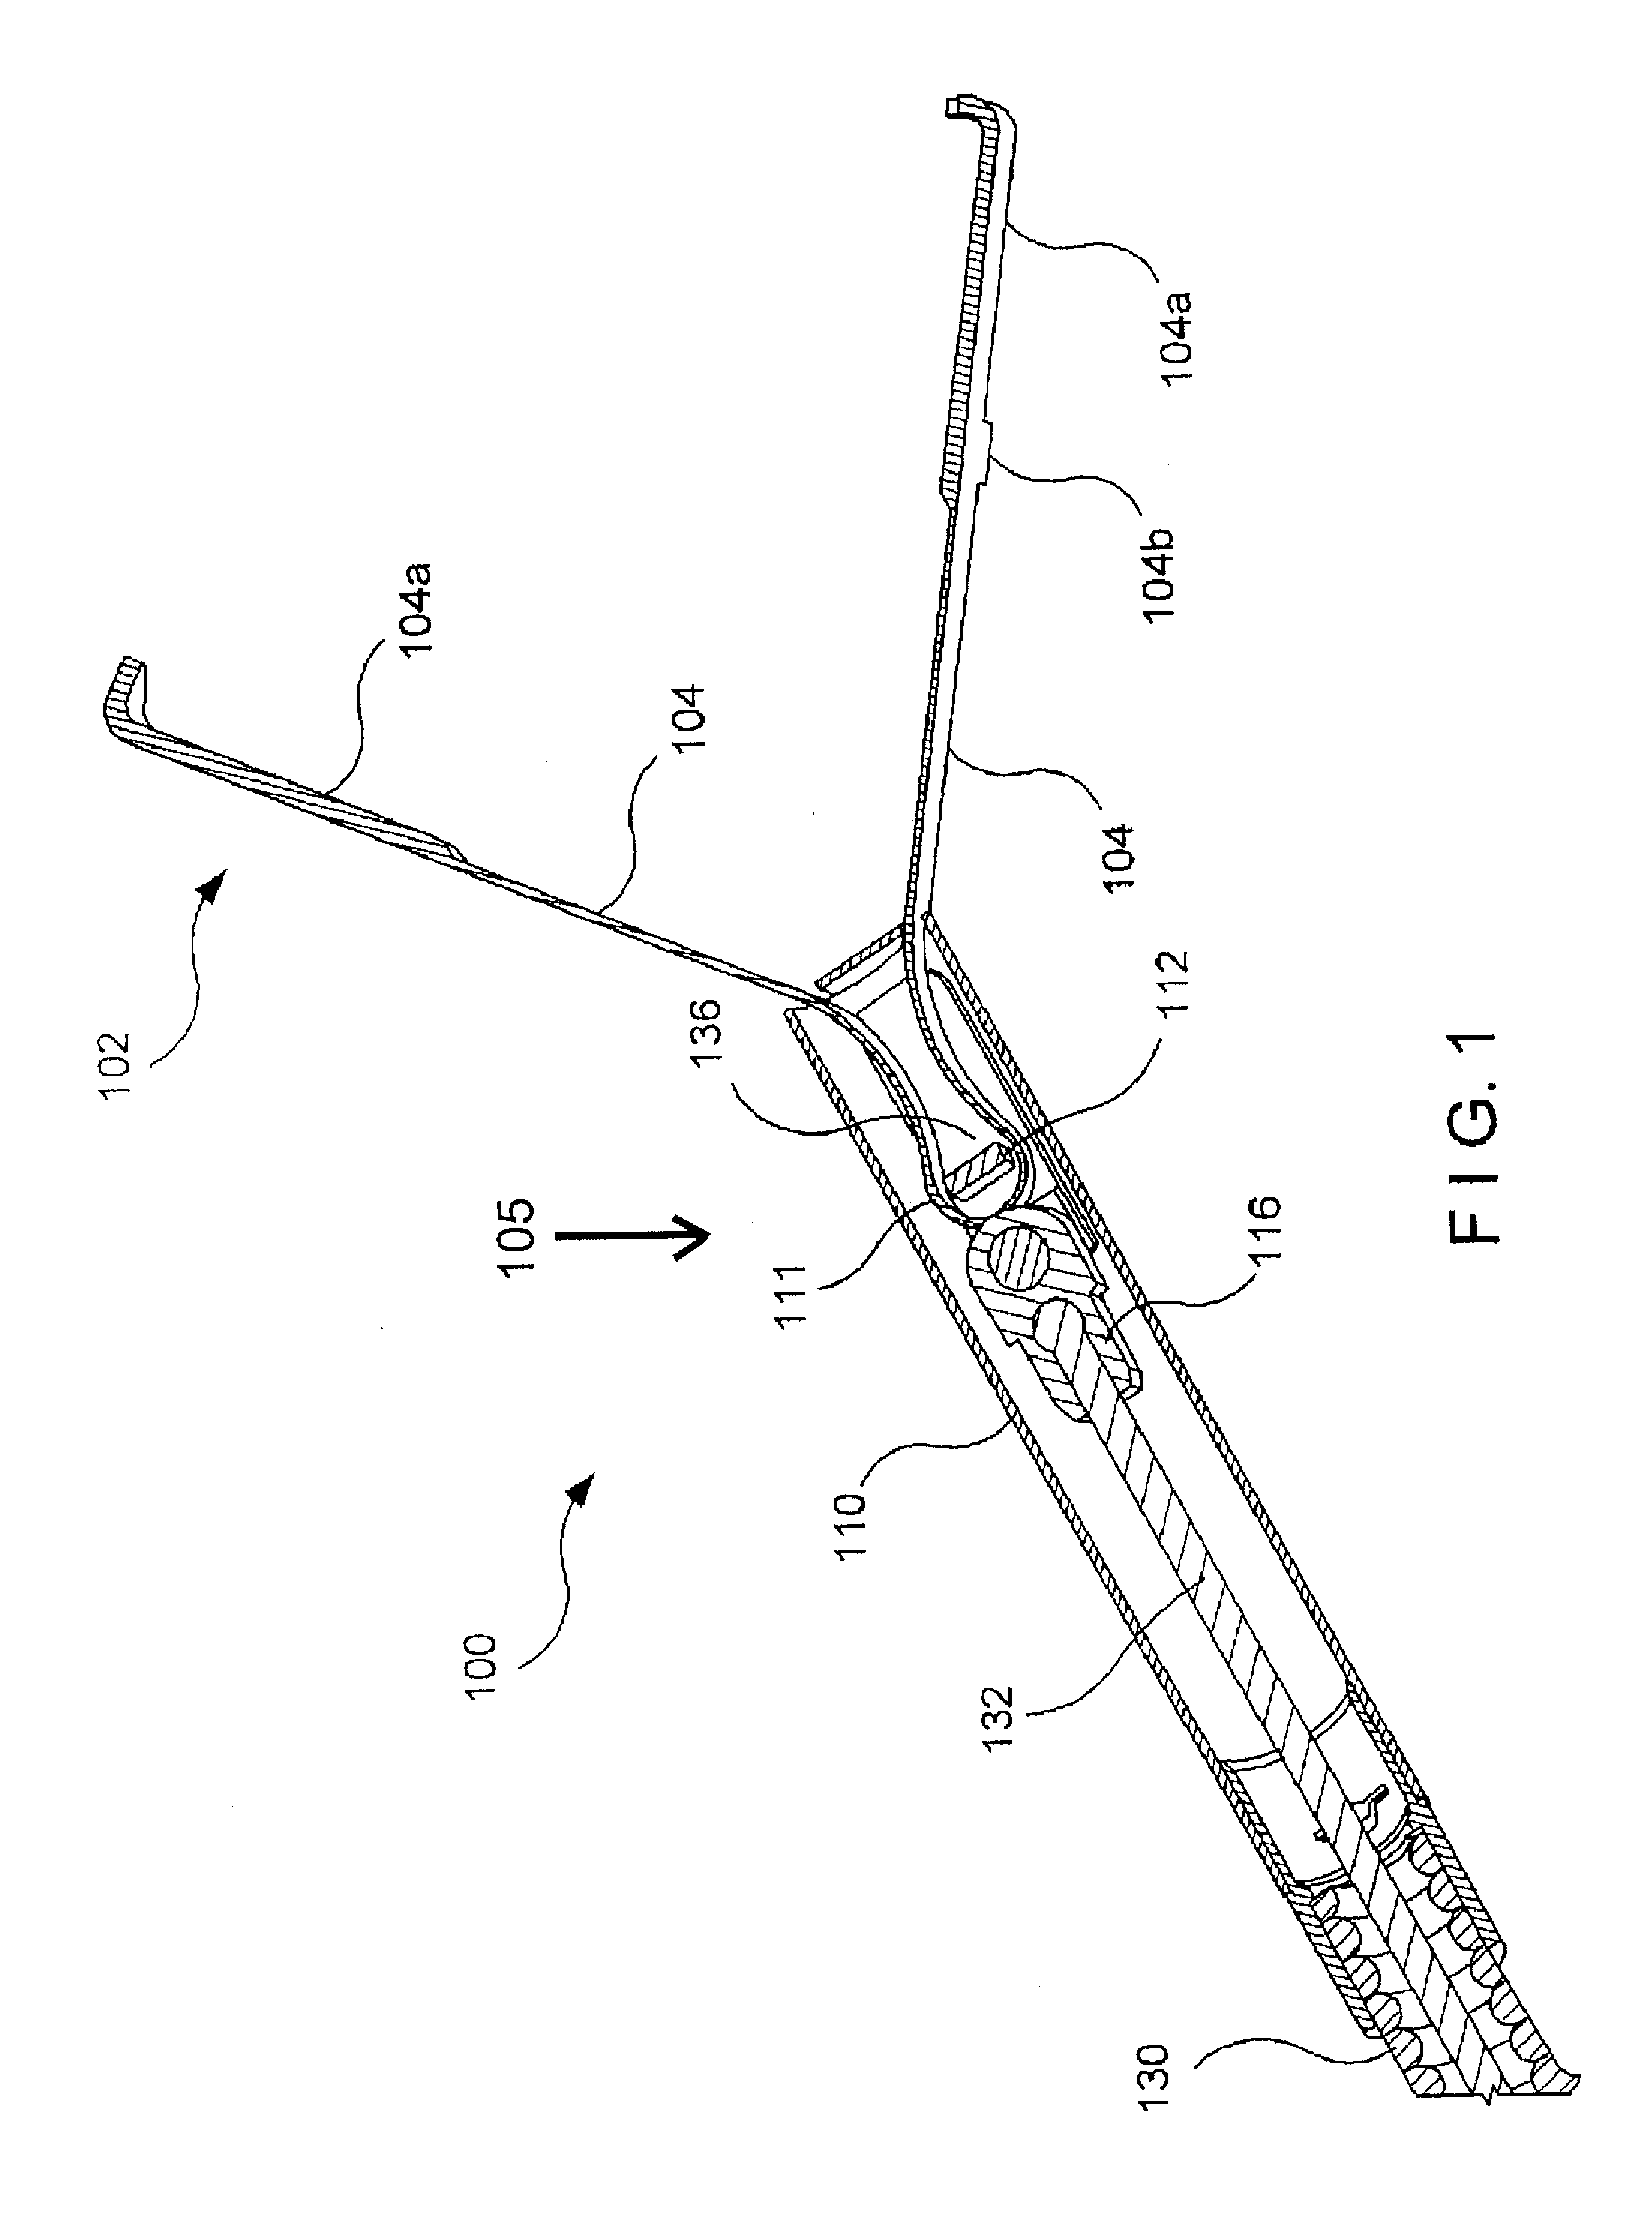 Hemostatic clipping devices and methods